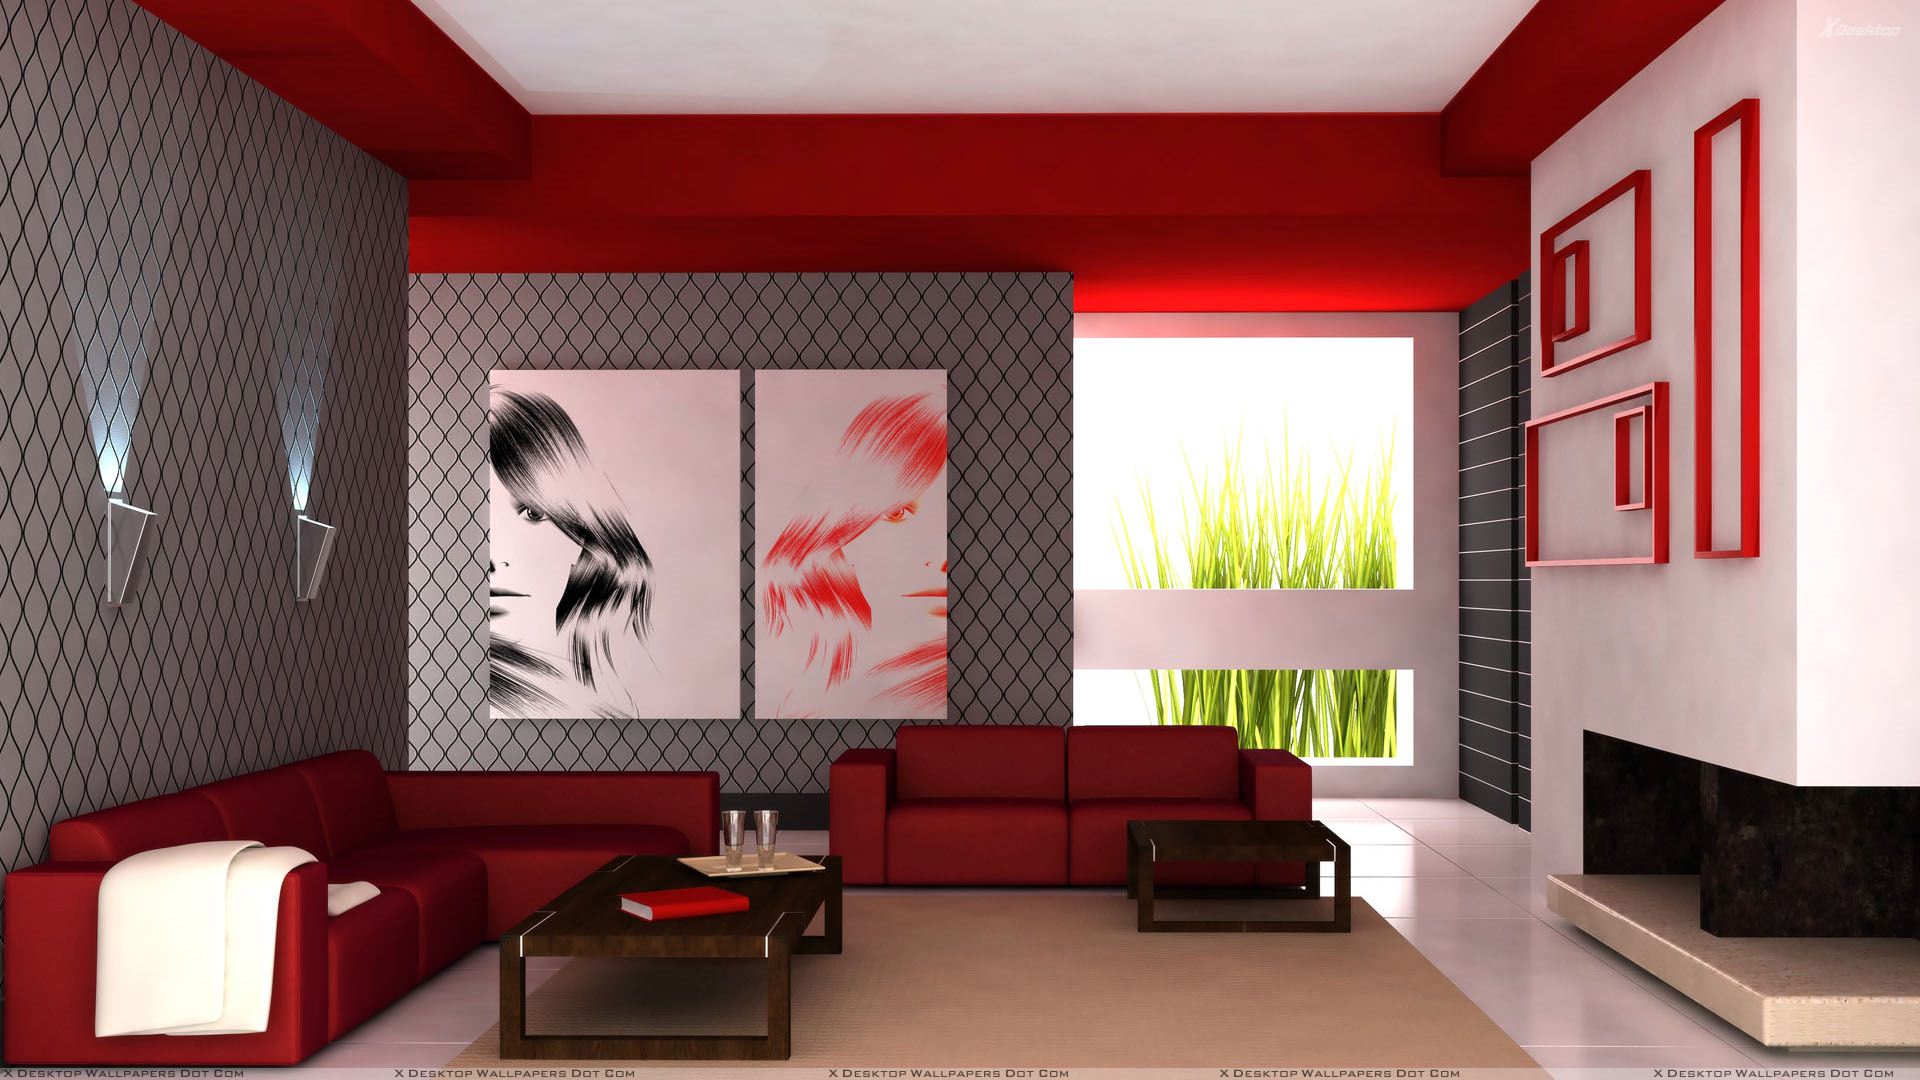 Red Sofa And Colorful Background In Guest Room Wallpaper